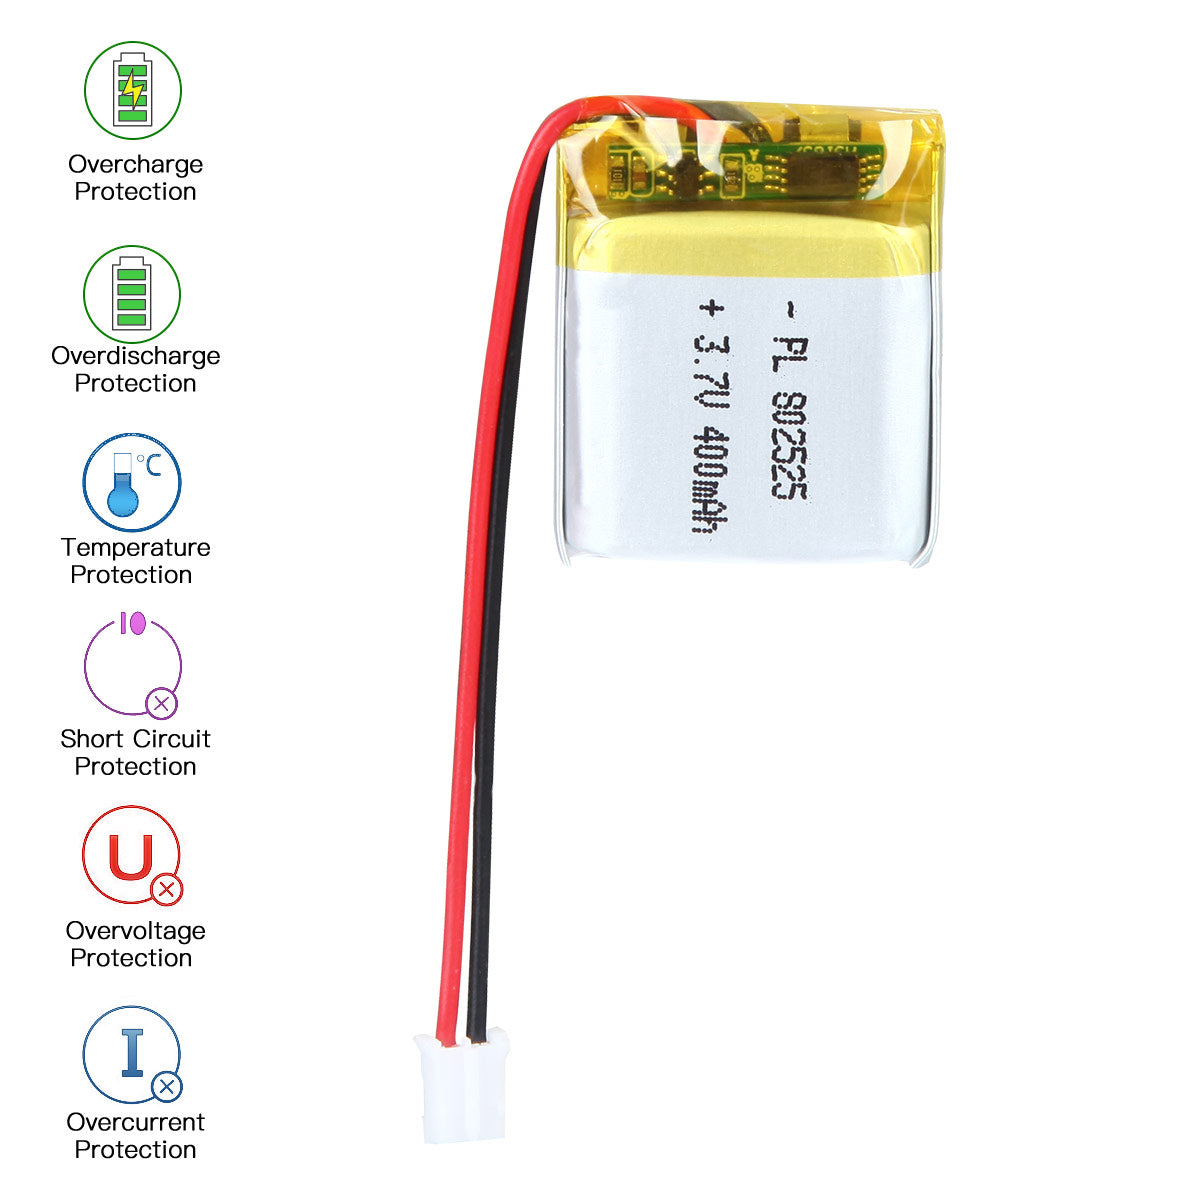 YDL 3.7V 400mAh 802525 Rechargeable Lithium Polymer Battery